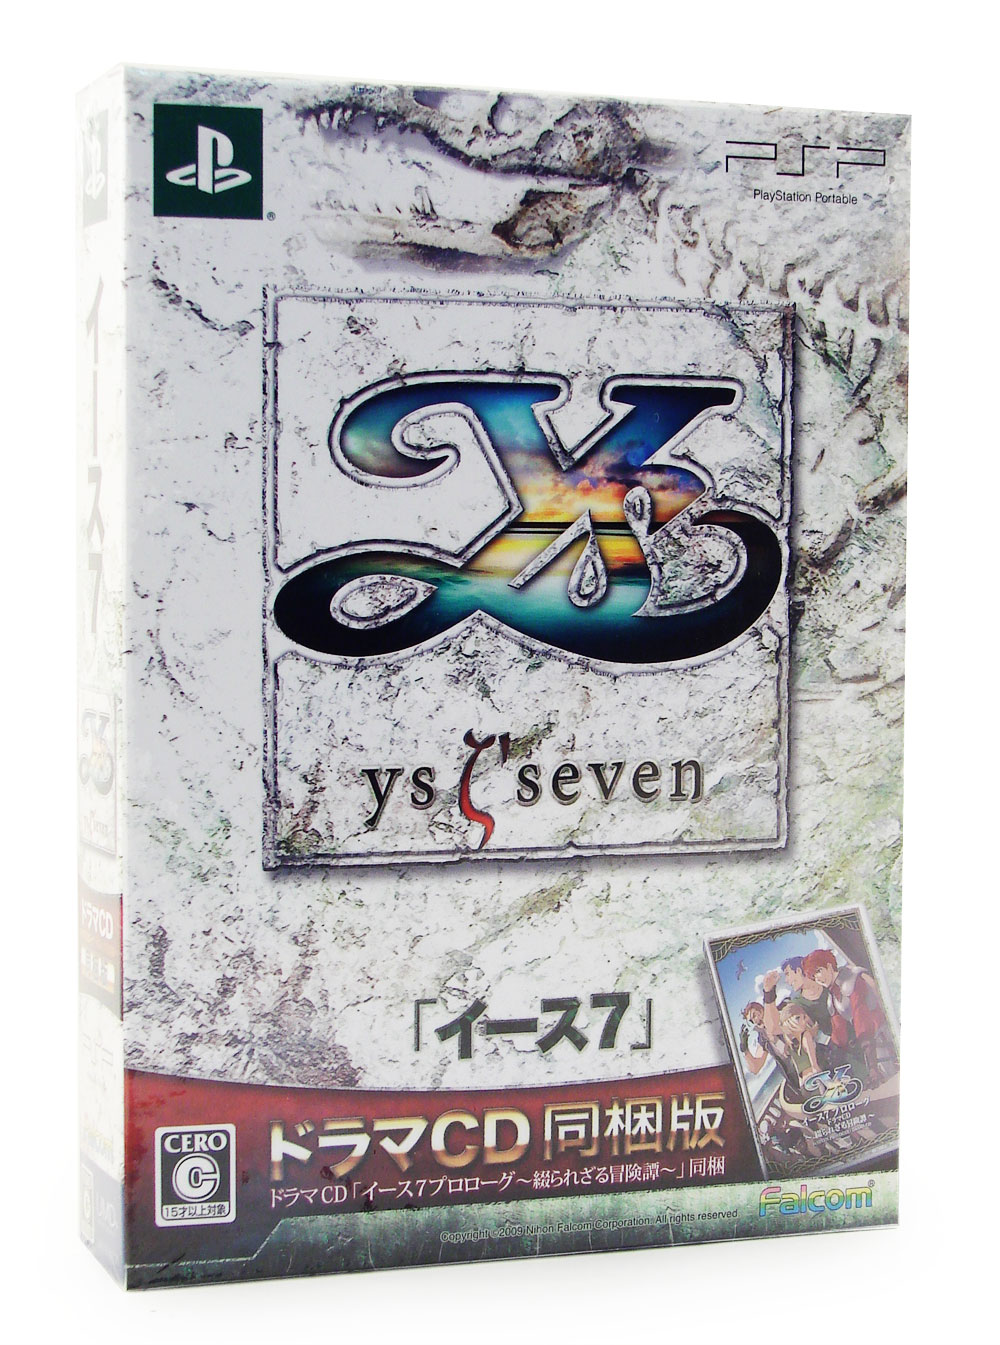 Ys Seven [Limited Edition] for Sony PSP